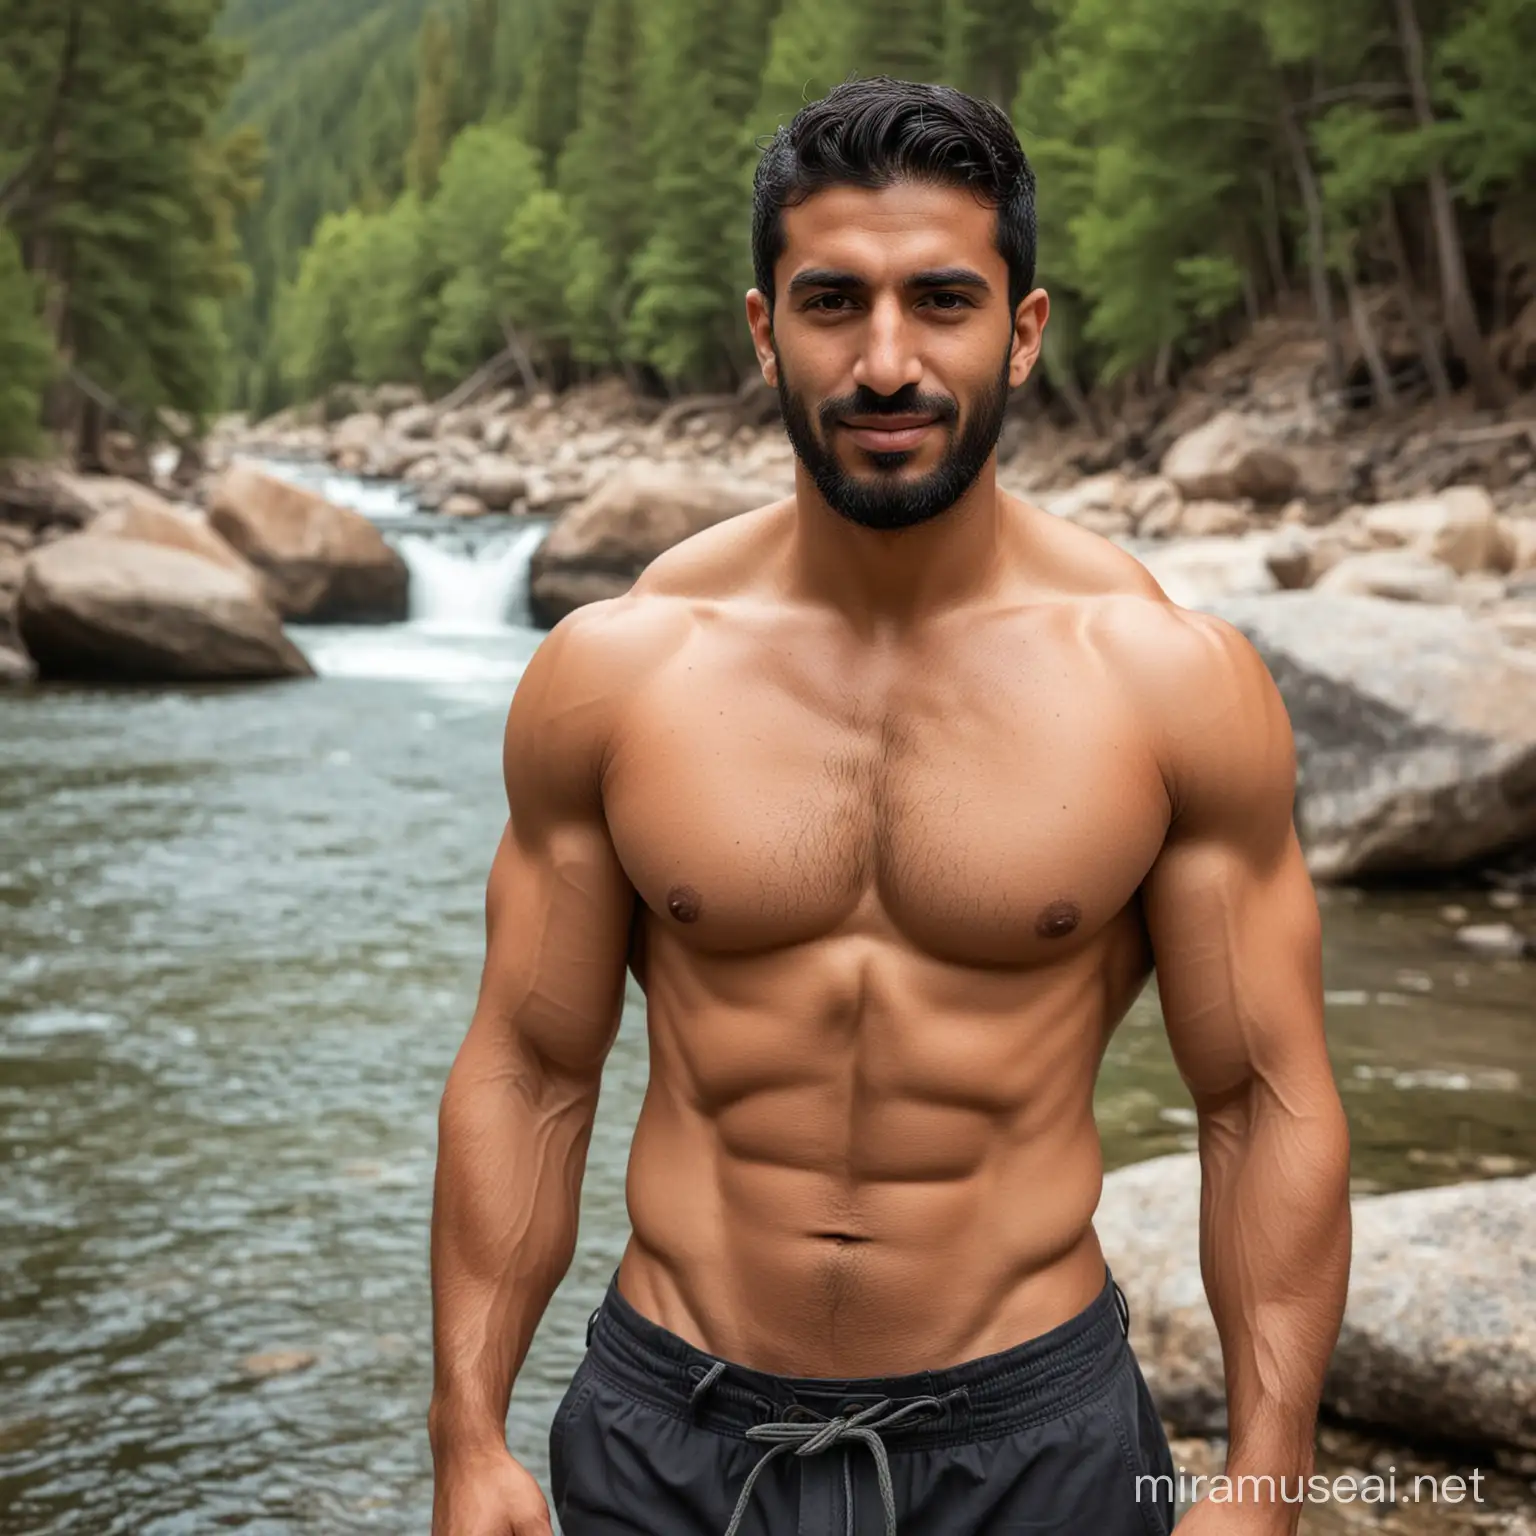 Handsome, brawny middle eastern man, age 32, shirtless, at a mountain river